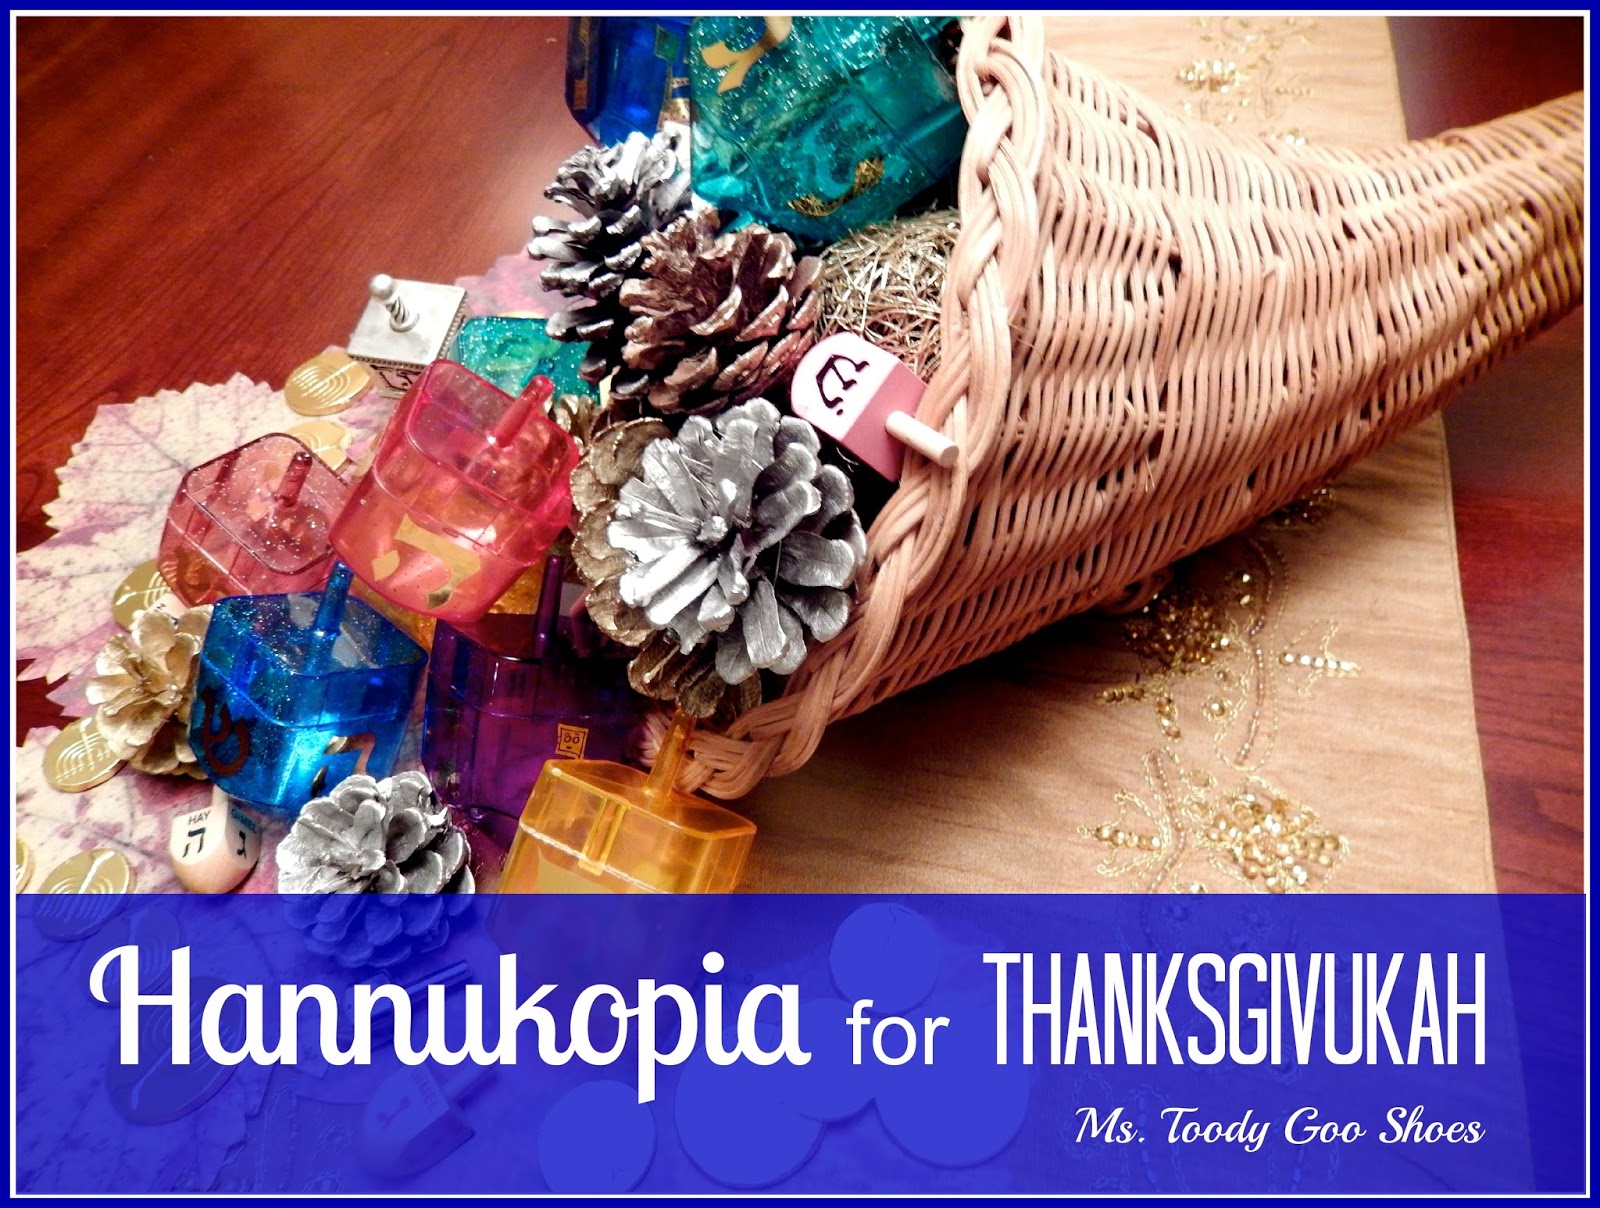 The Hannukopia - A Thanksgivukah Centerpiece  by Ms. Toody Goo Shoes